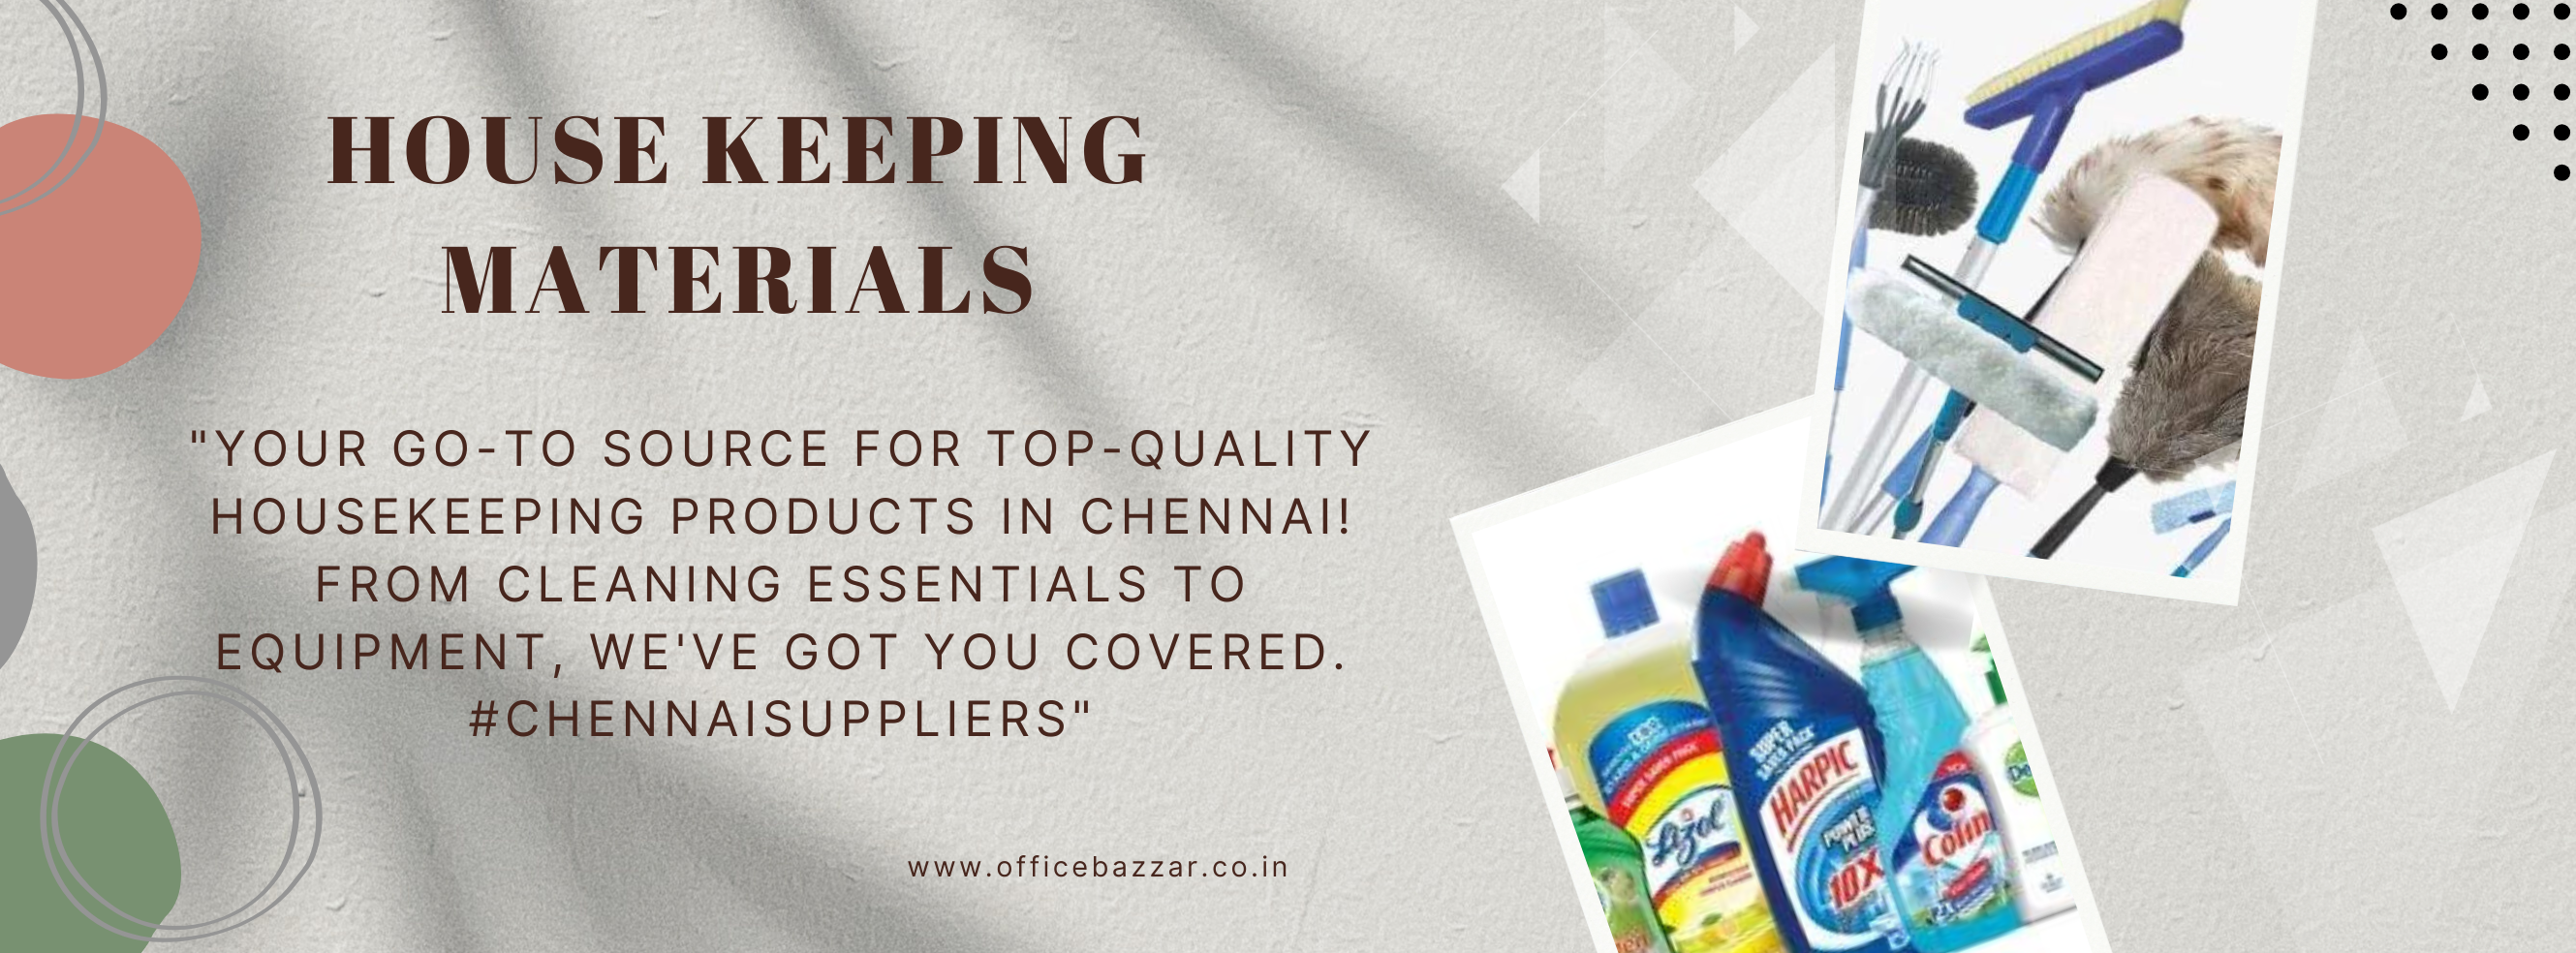 house keeping material supplier in Chennai. 

